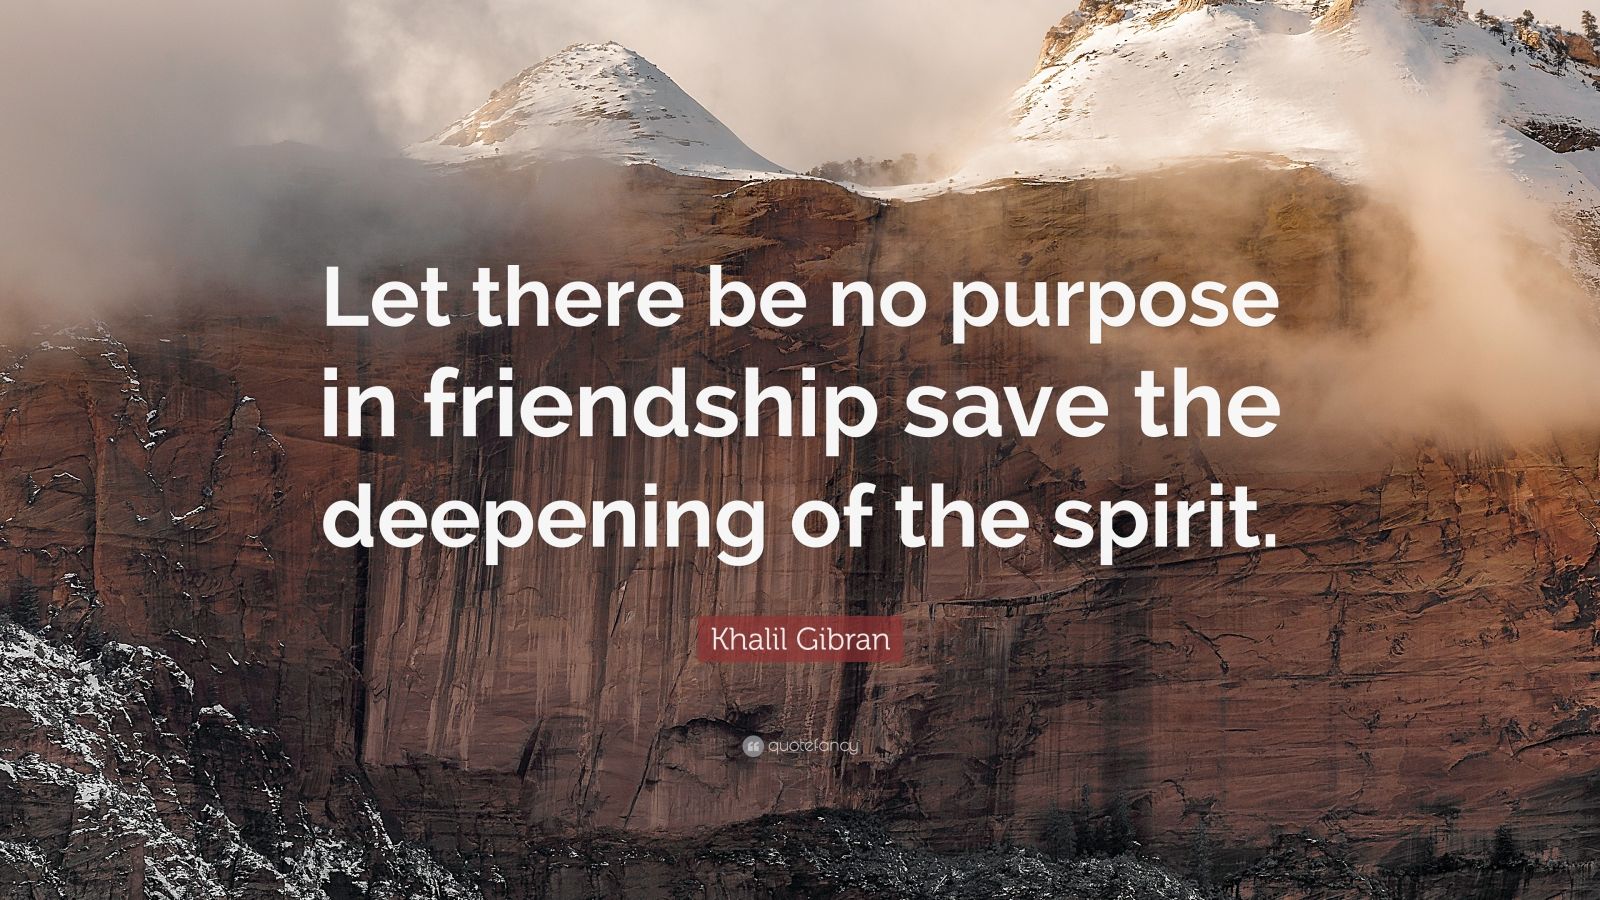 Khalil Gibran Quote: “Let there be no purpose in friendship save the